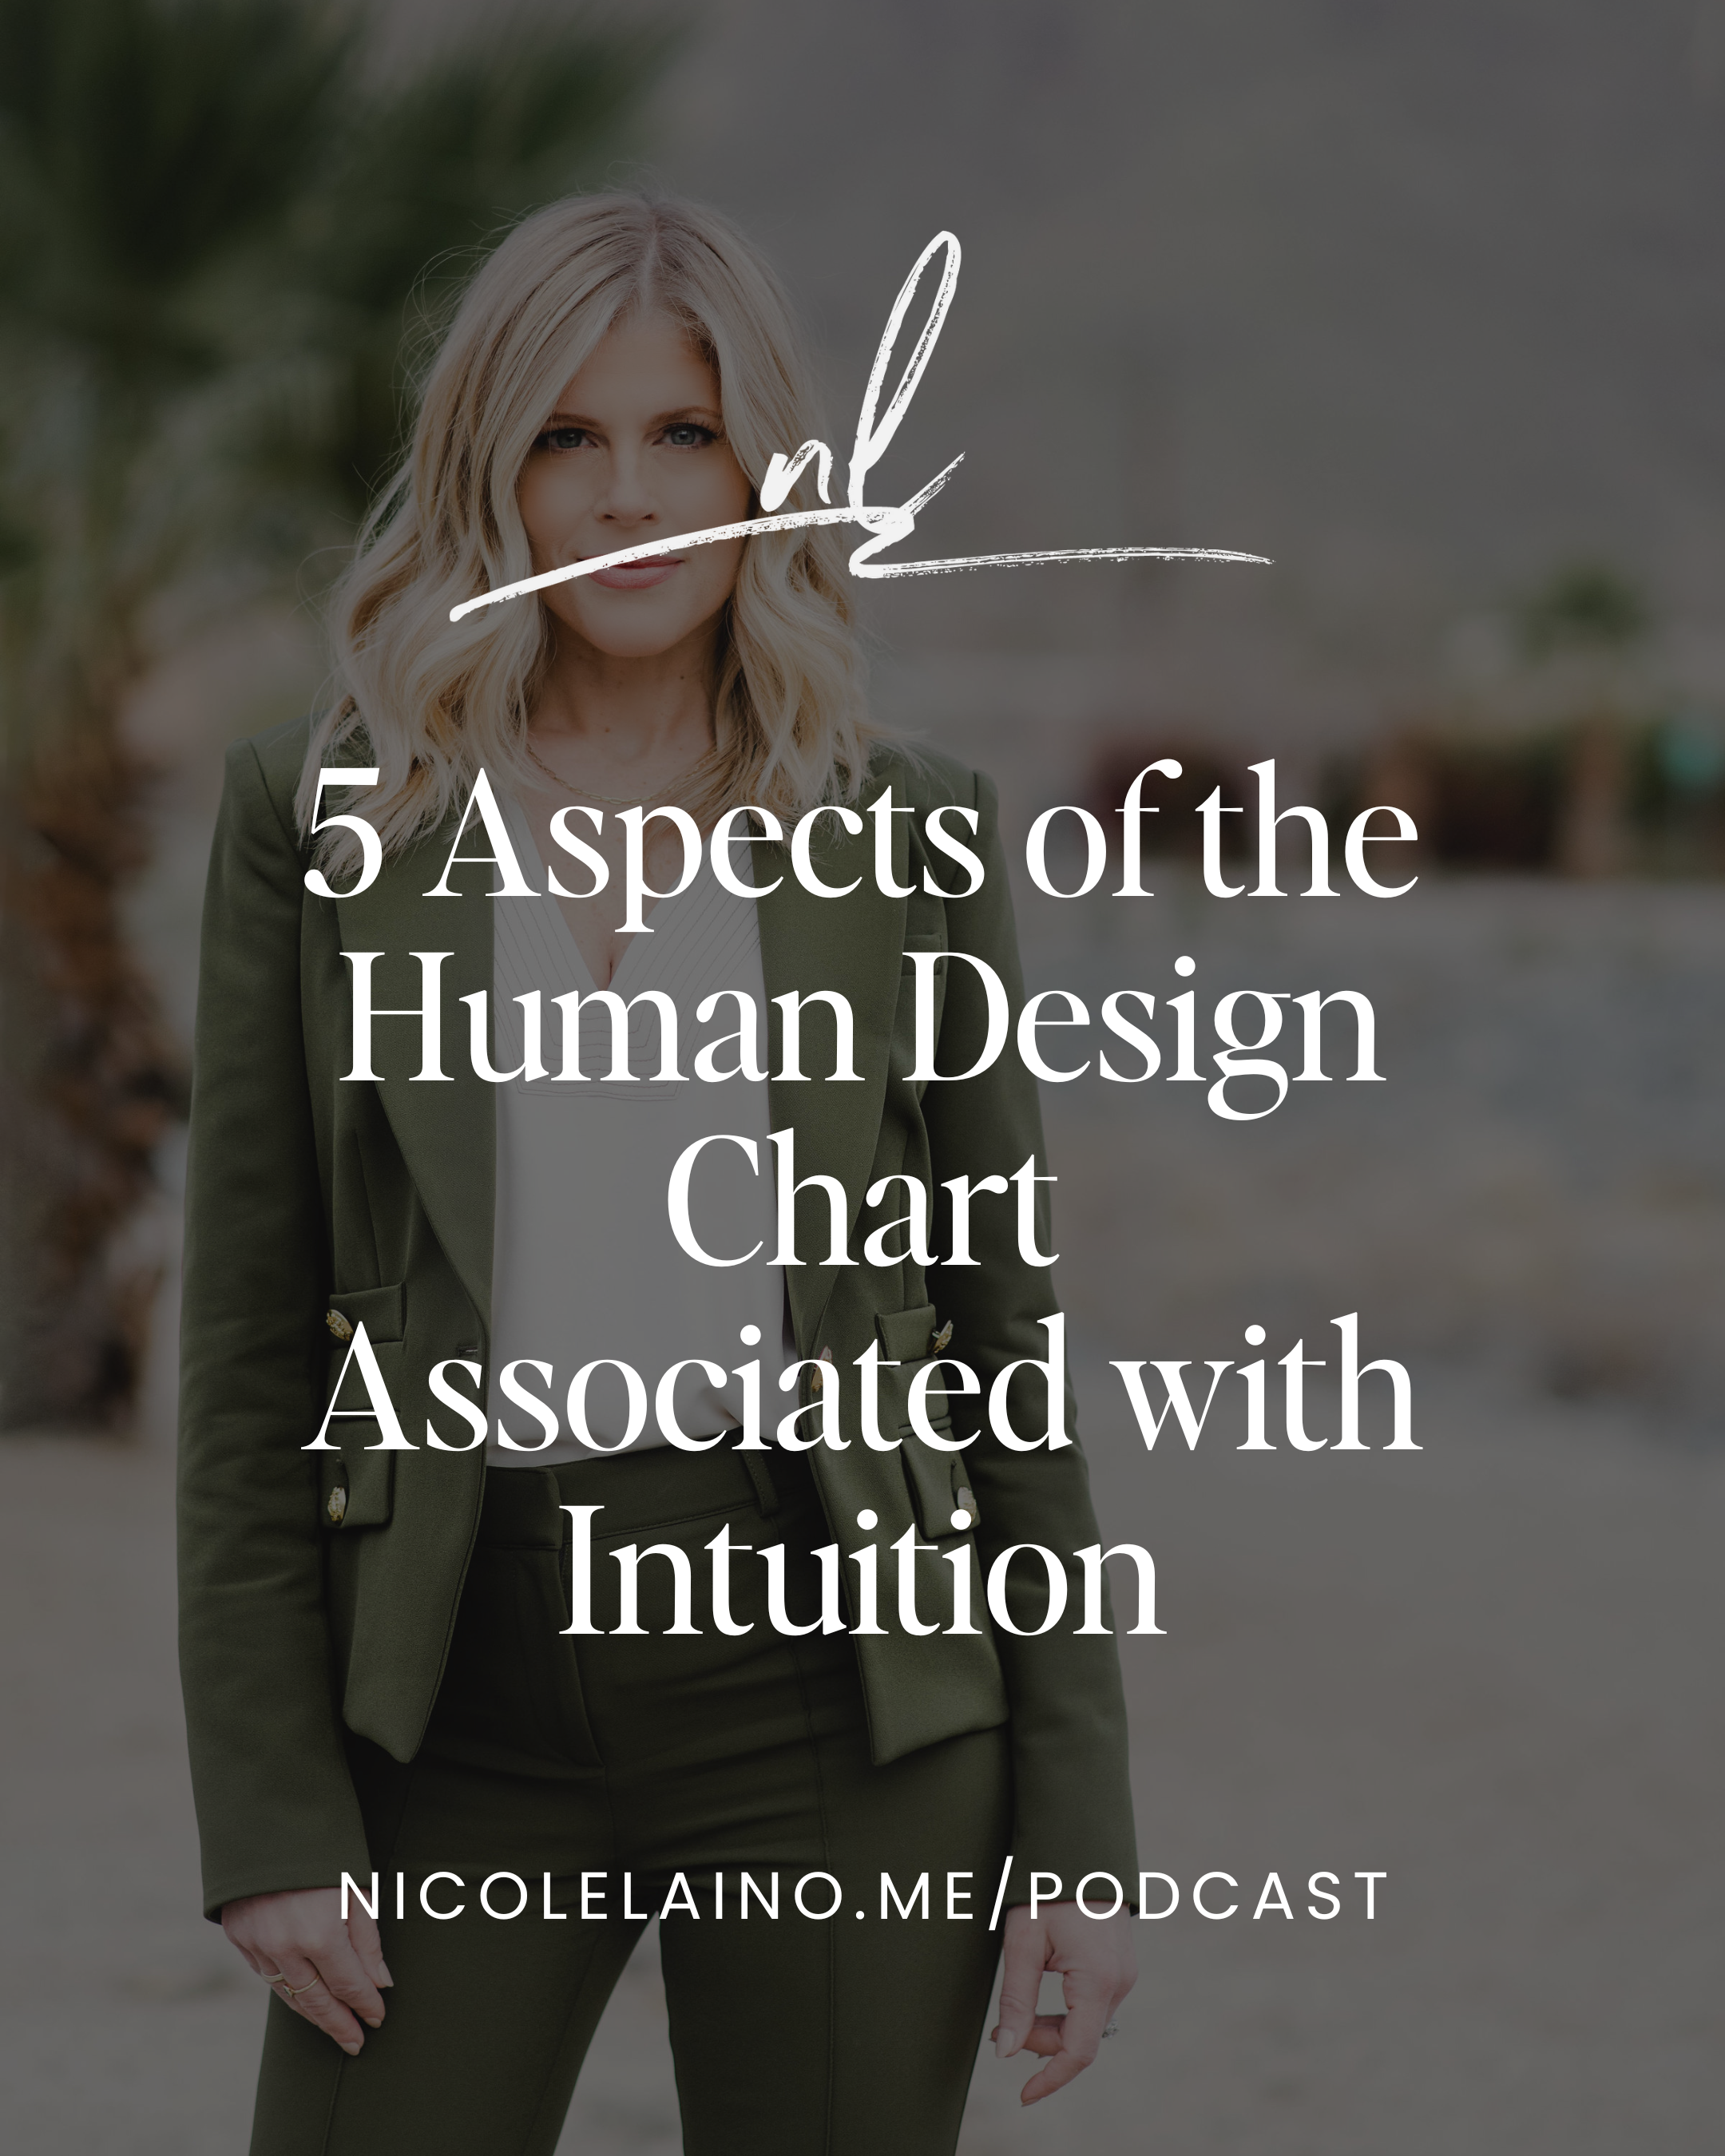 5 Aspects of the Human Design Chart Associated with Intuition